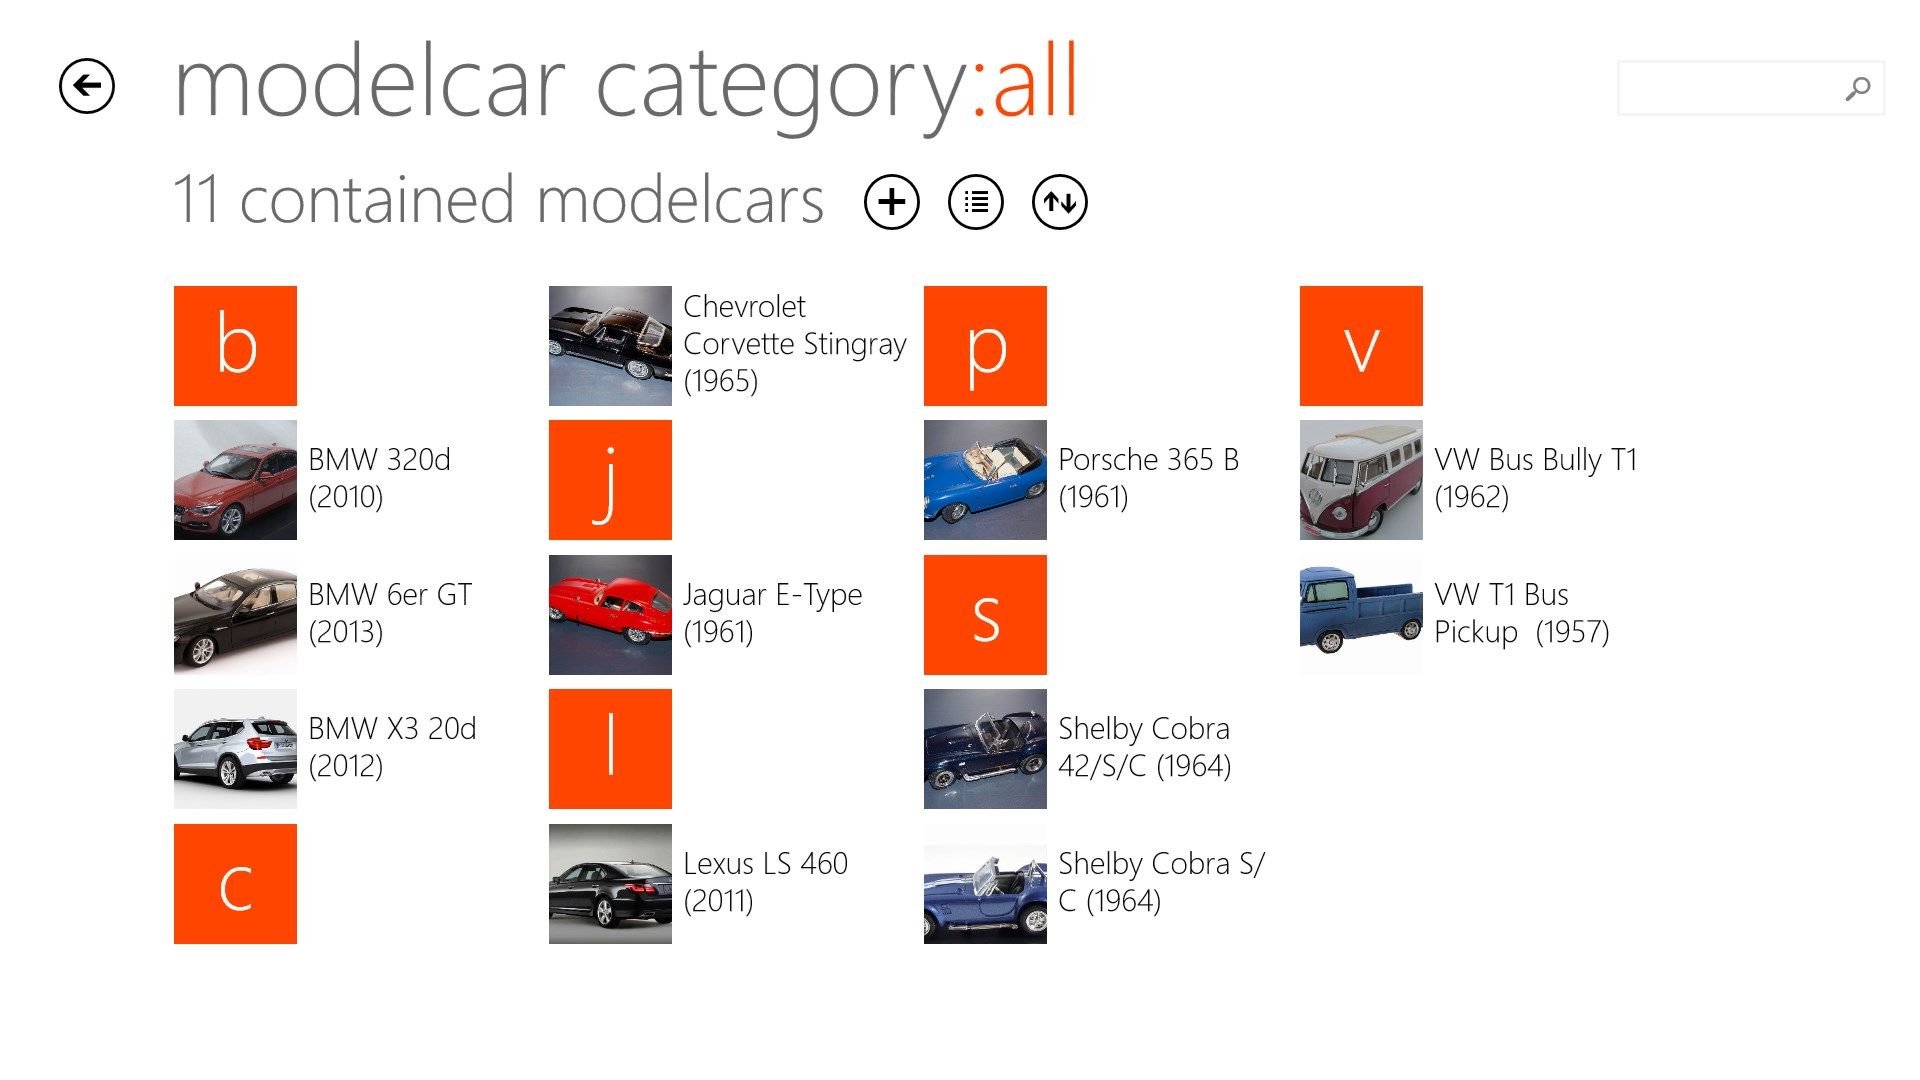 Overview of the model car category "all"